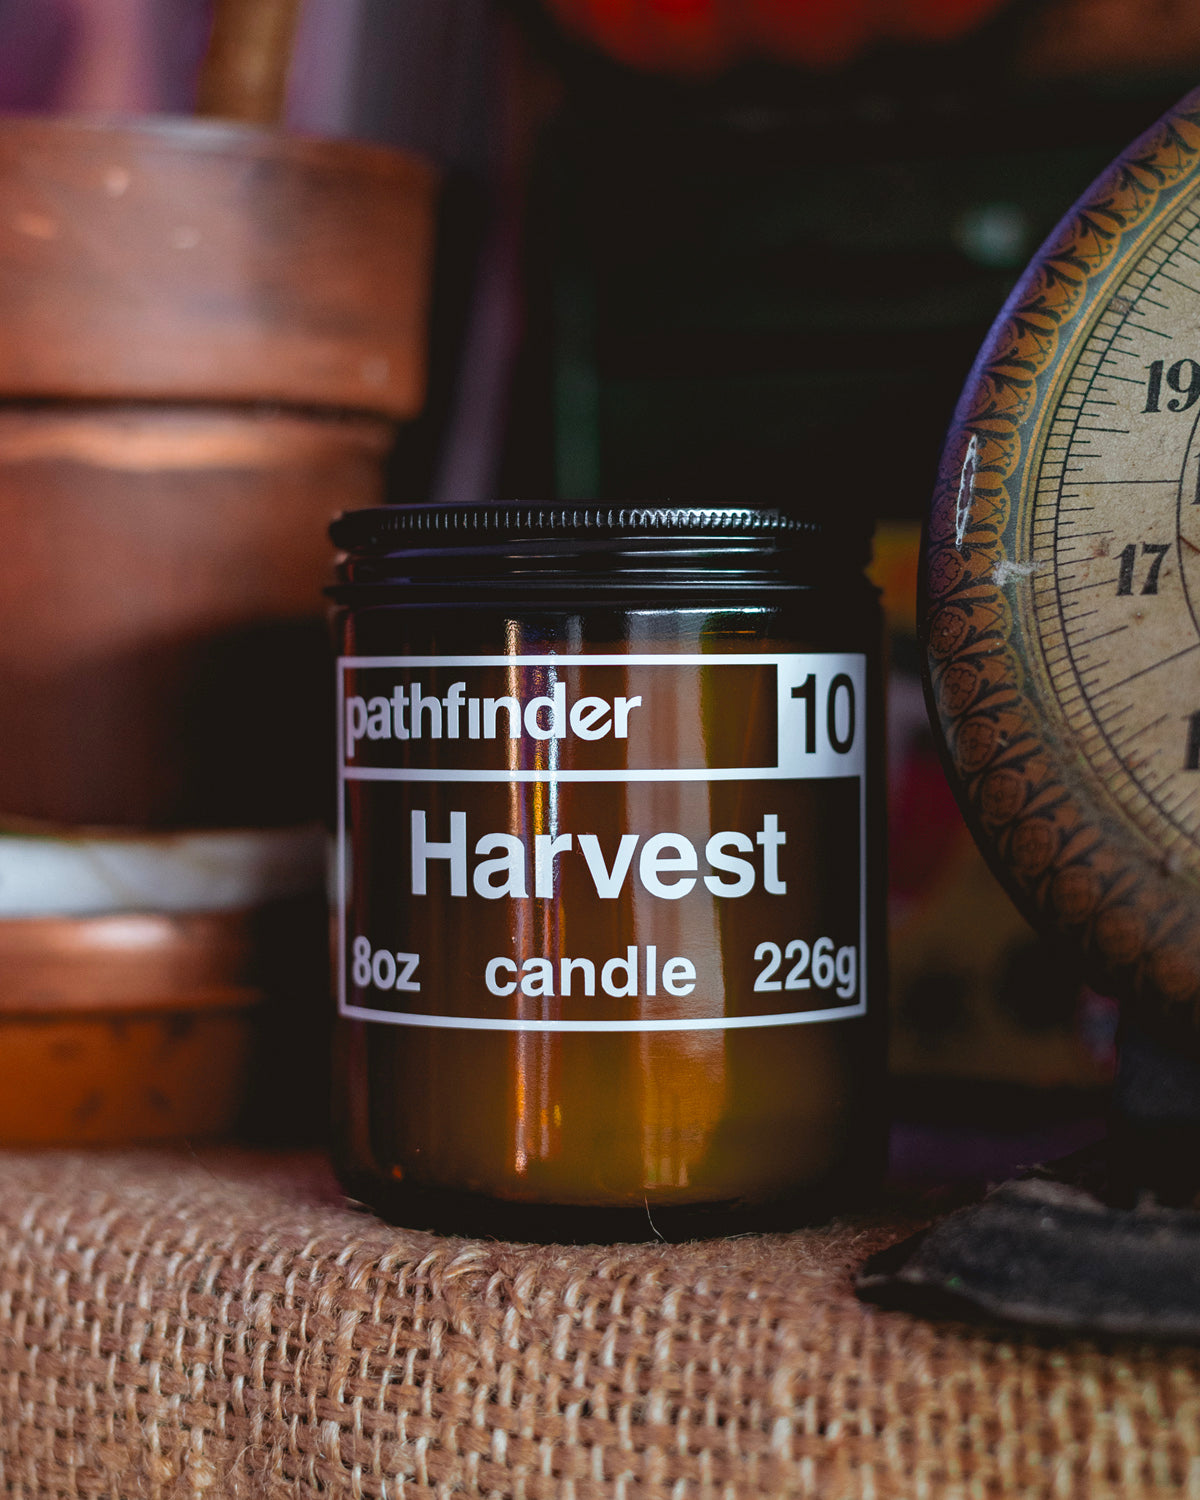 Apple Harvest Natural Soy Wax Candle with Cotton Wick – Gunslinger